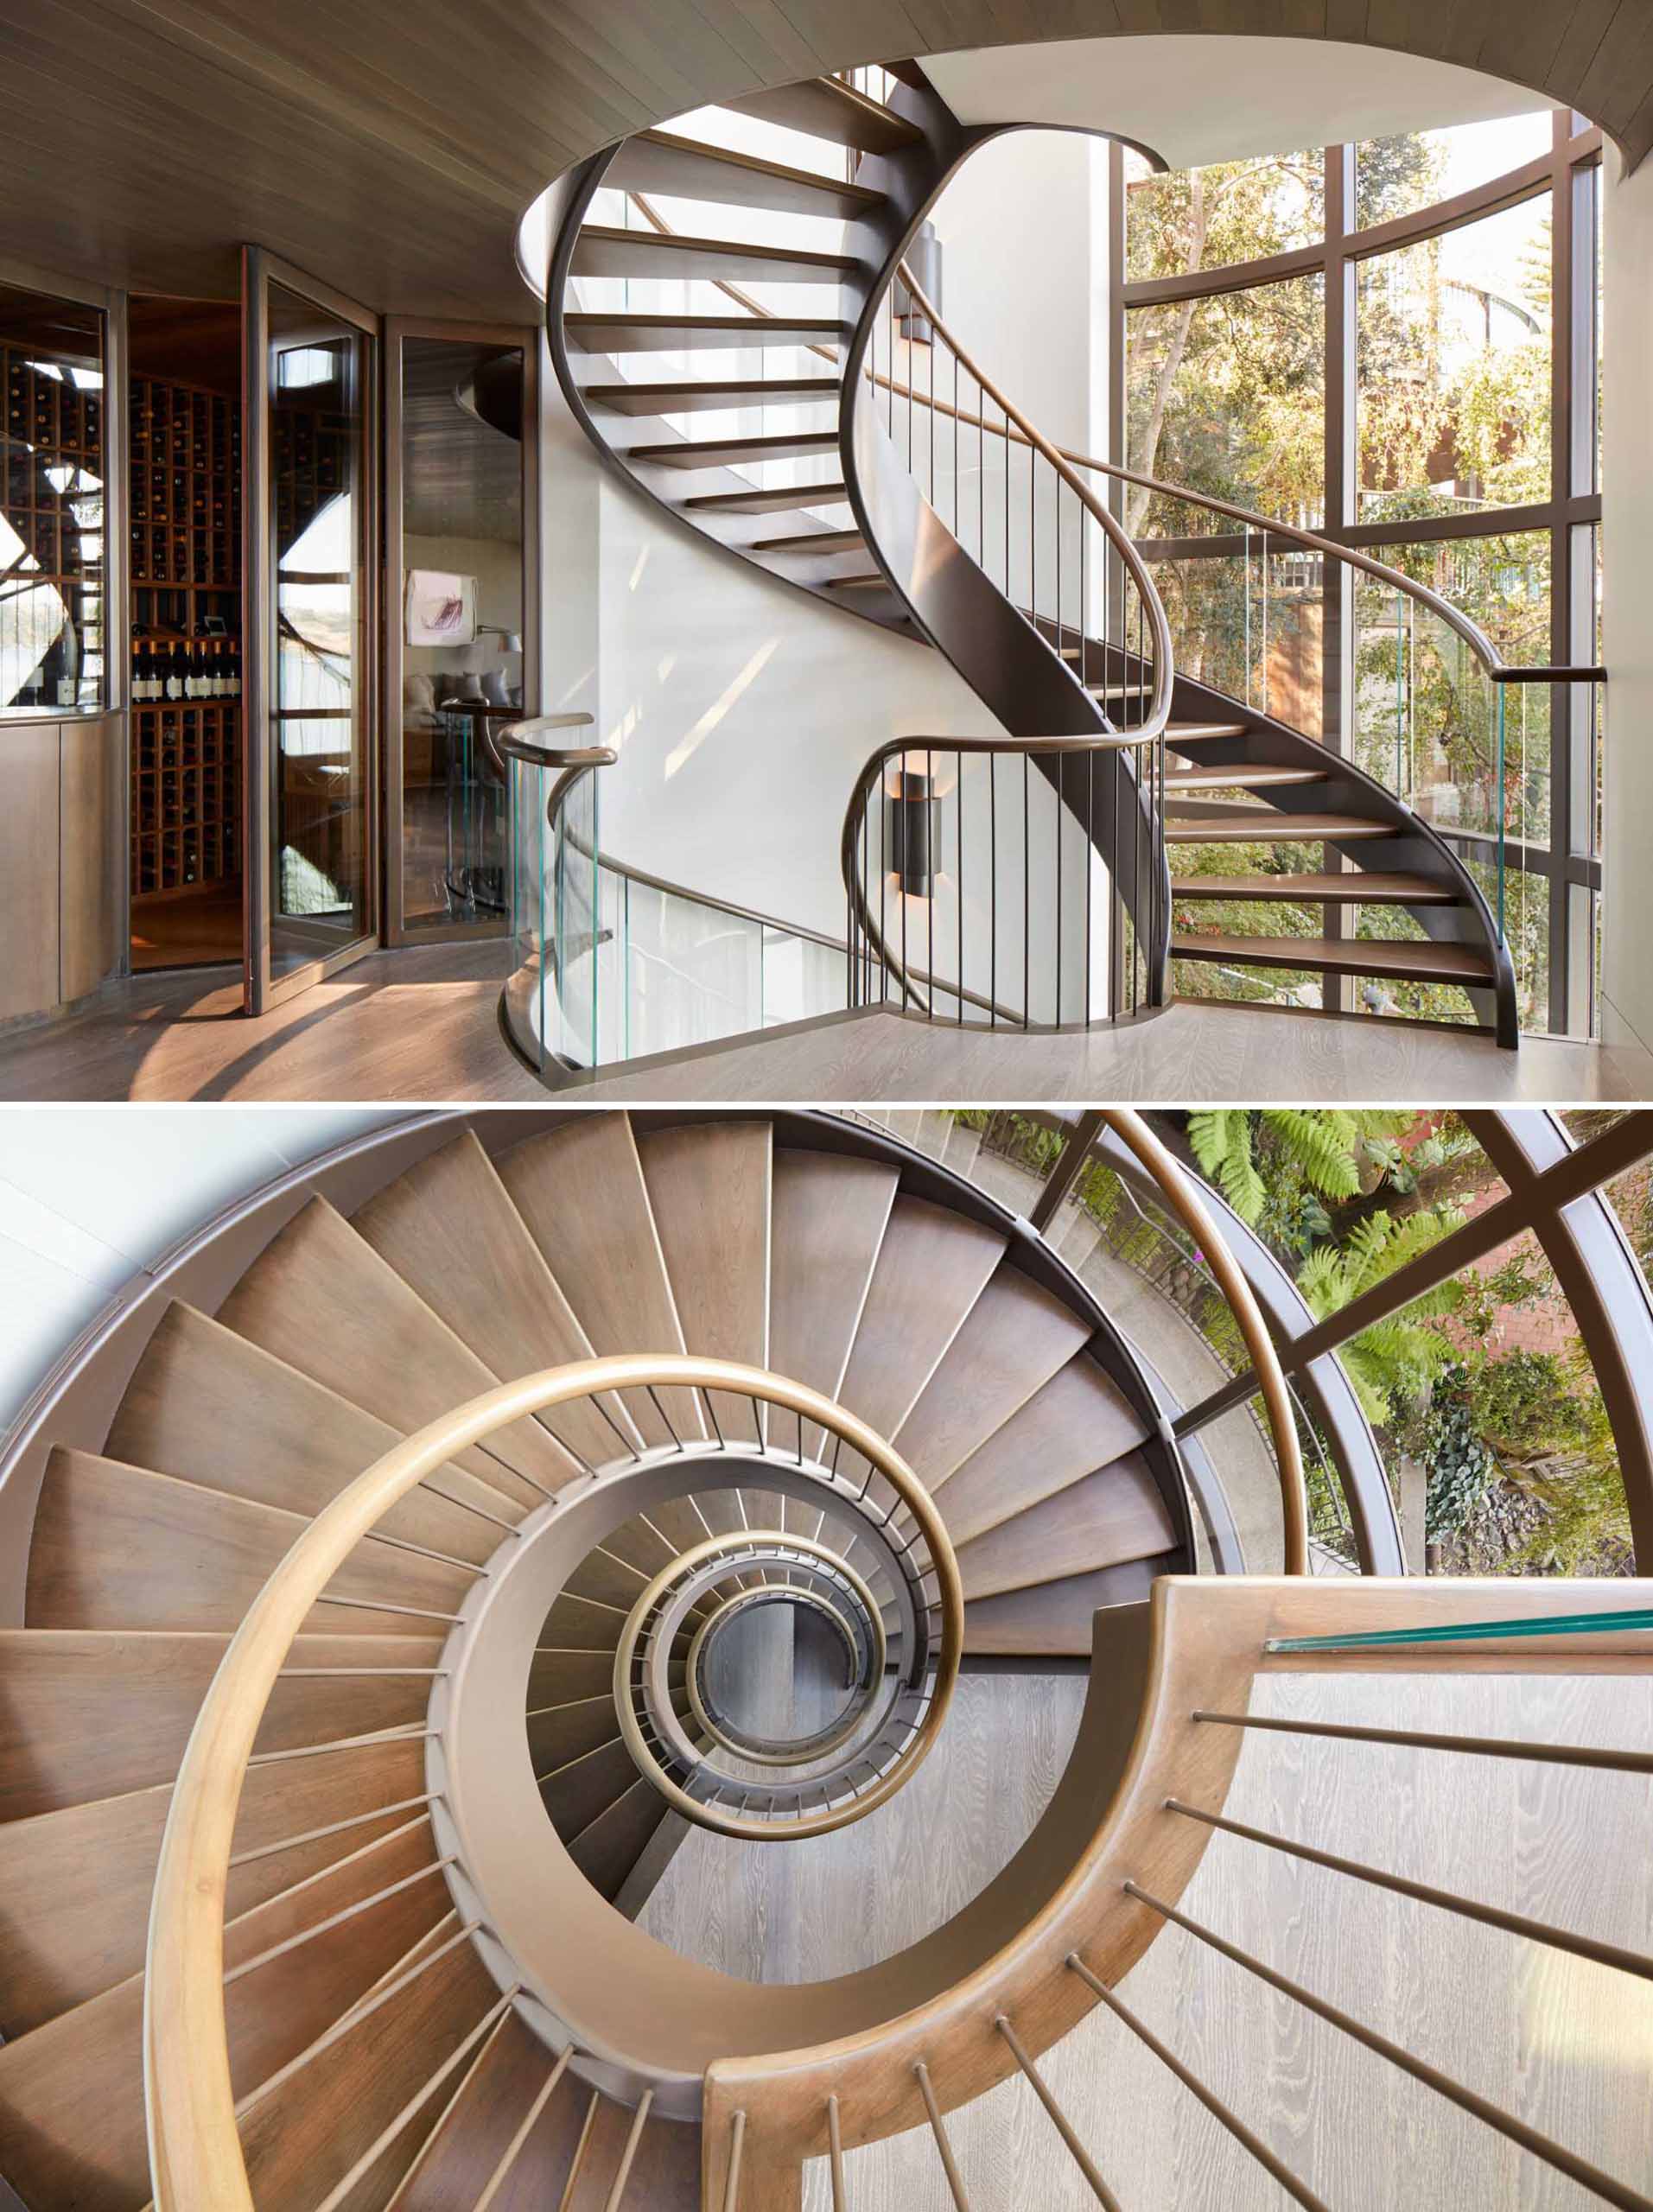 A contemporary home with spiral staircase.